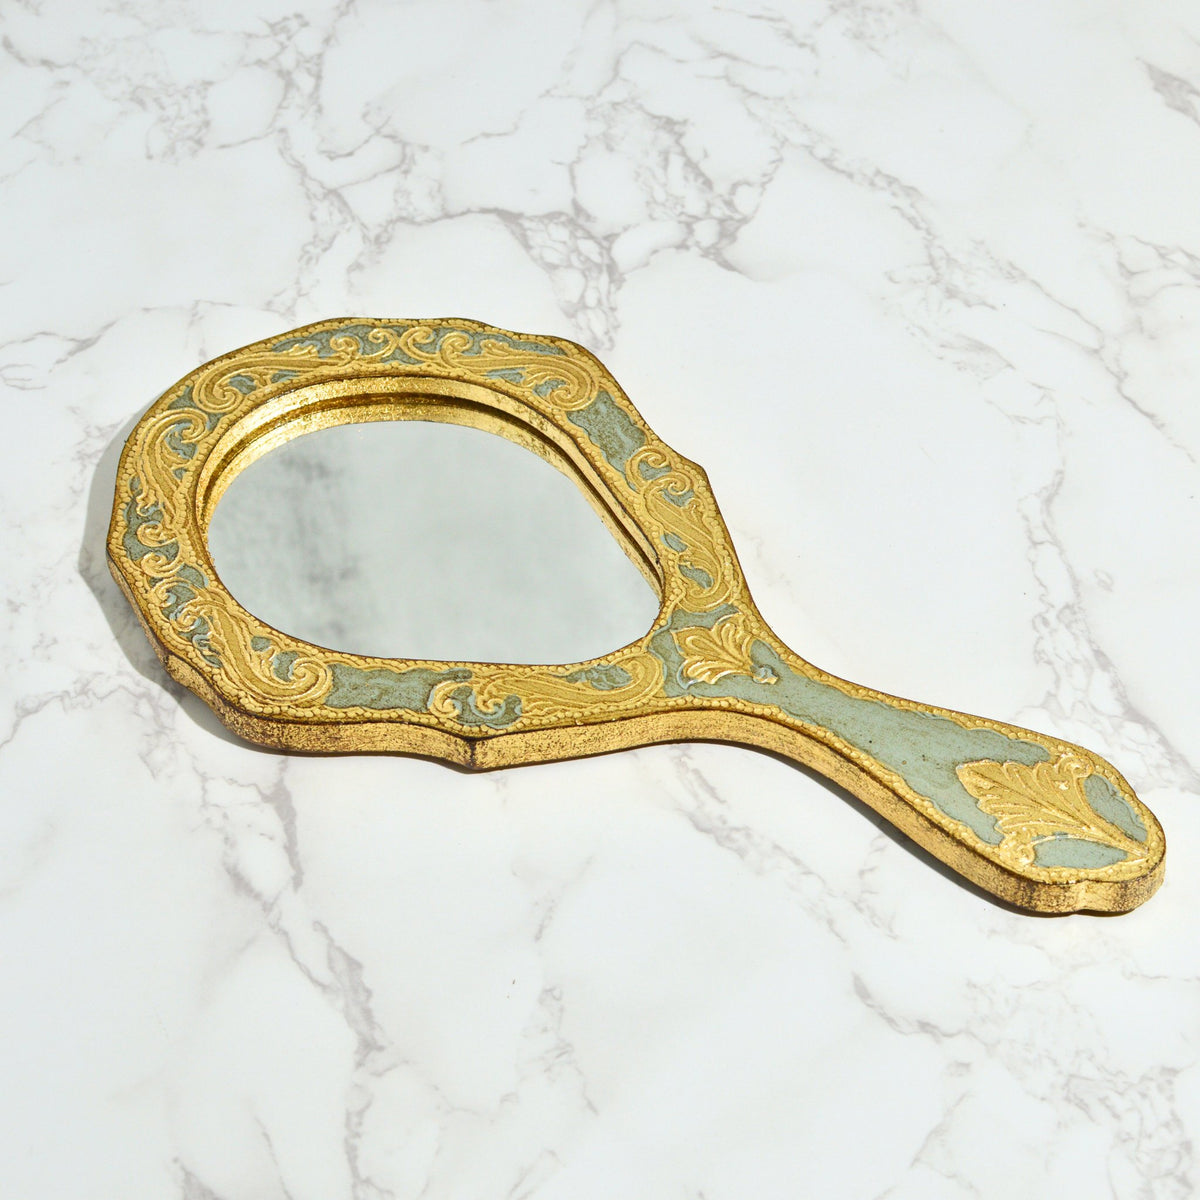 Florentine Wood Oval Hand Mirror, Made in Italy - My Italian Decor